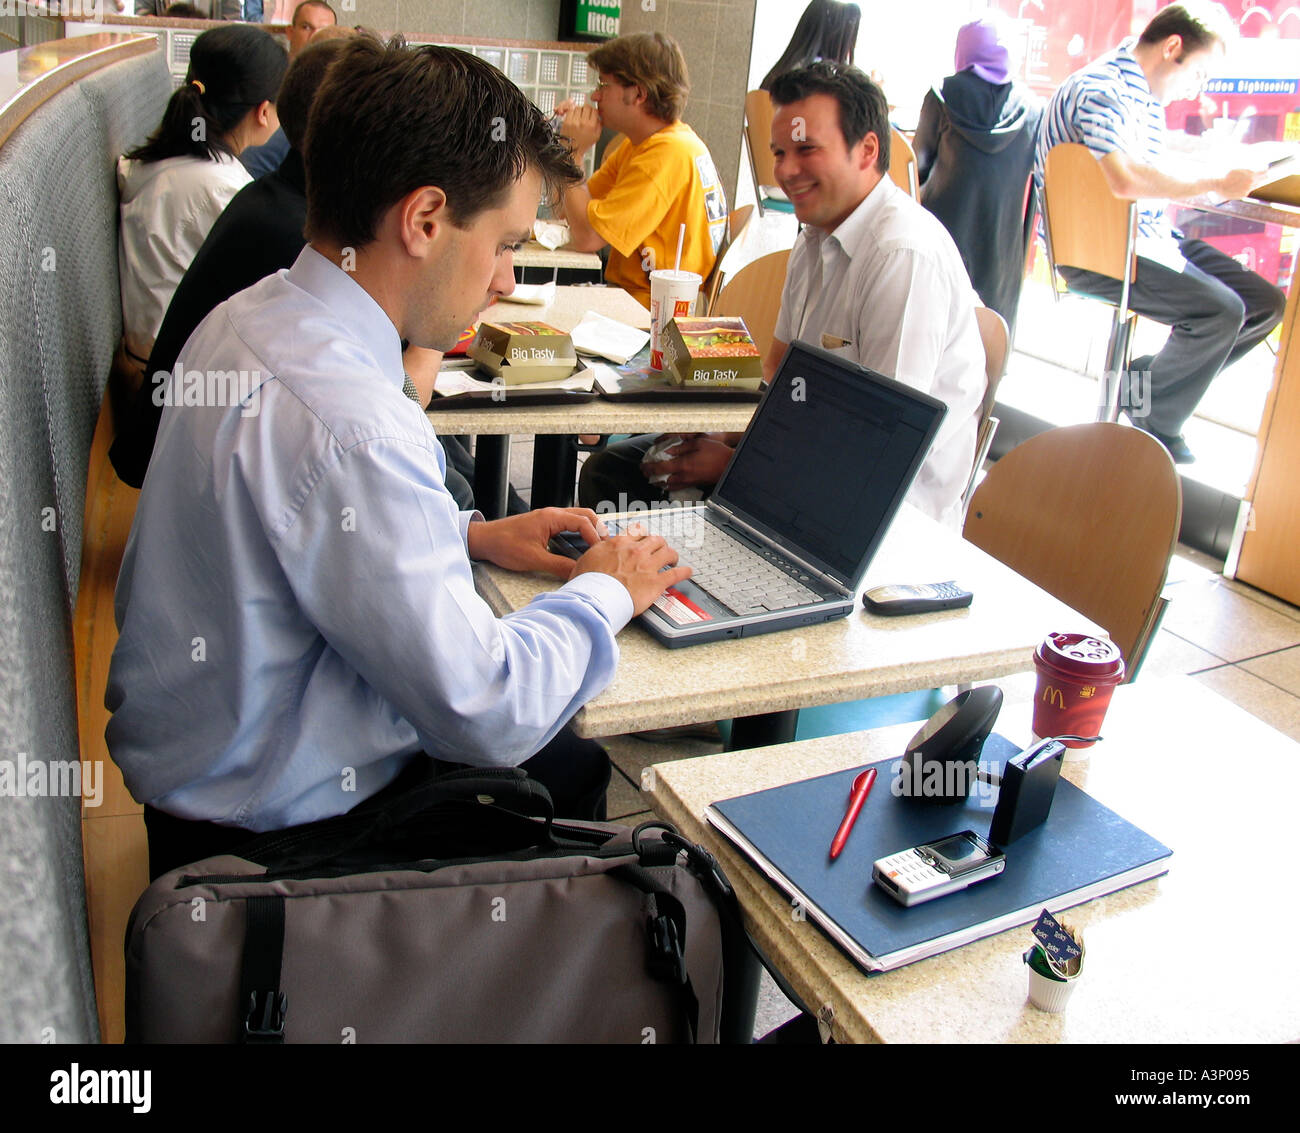 Man with laptop computer in a London cafe Stock Photo